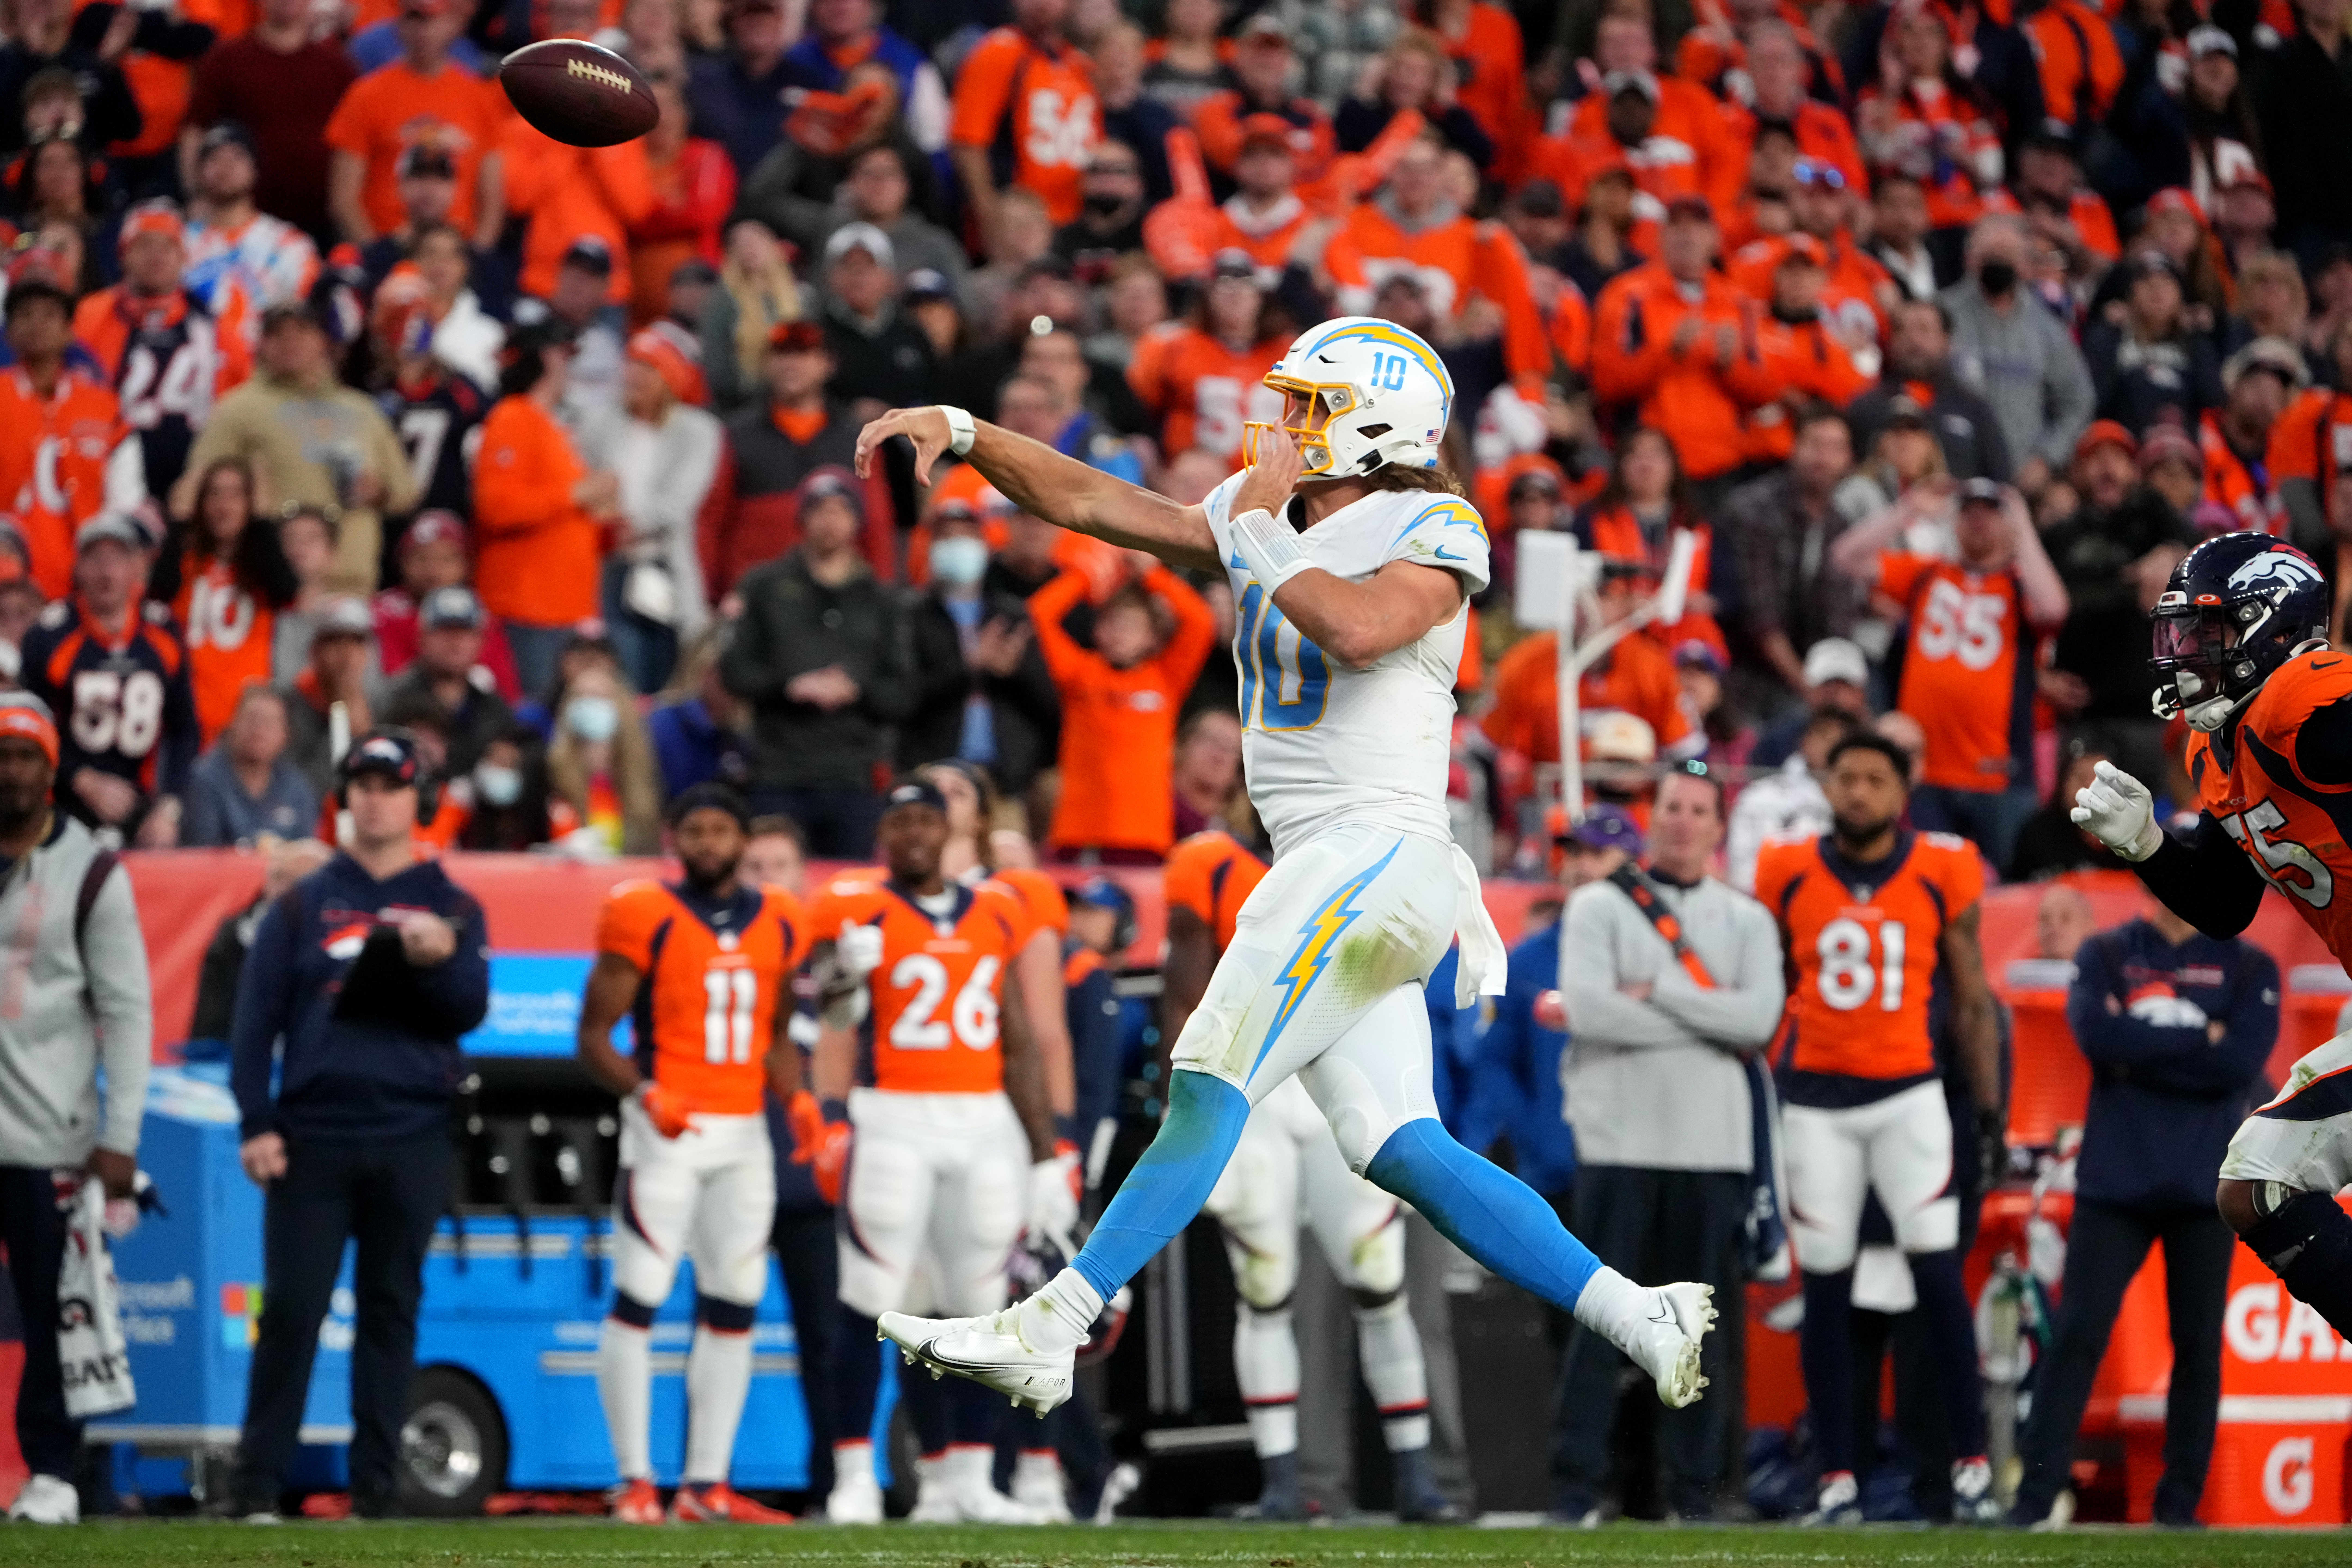 Nov 28, 2021; Denver, Colorado, USA; Los Angeles Chargers quarterback Justin Herbert (10) passes the ball in the fourth quarter against the Denver Broncos at Empower Field at Mile High. Mandatory Credit: Ron Chenoy-USA TODAY Sports